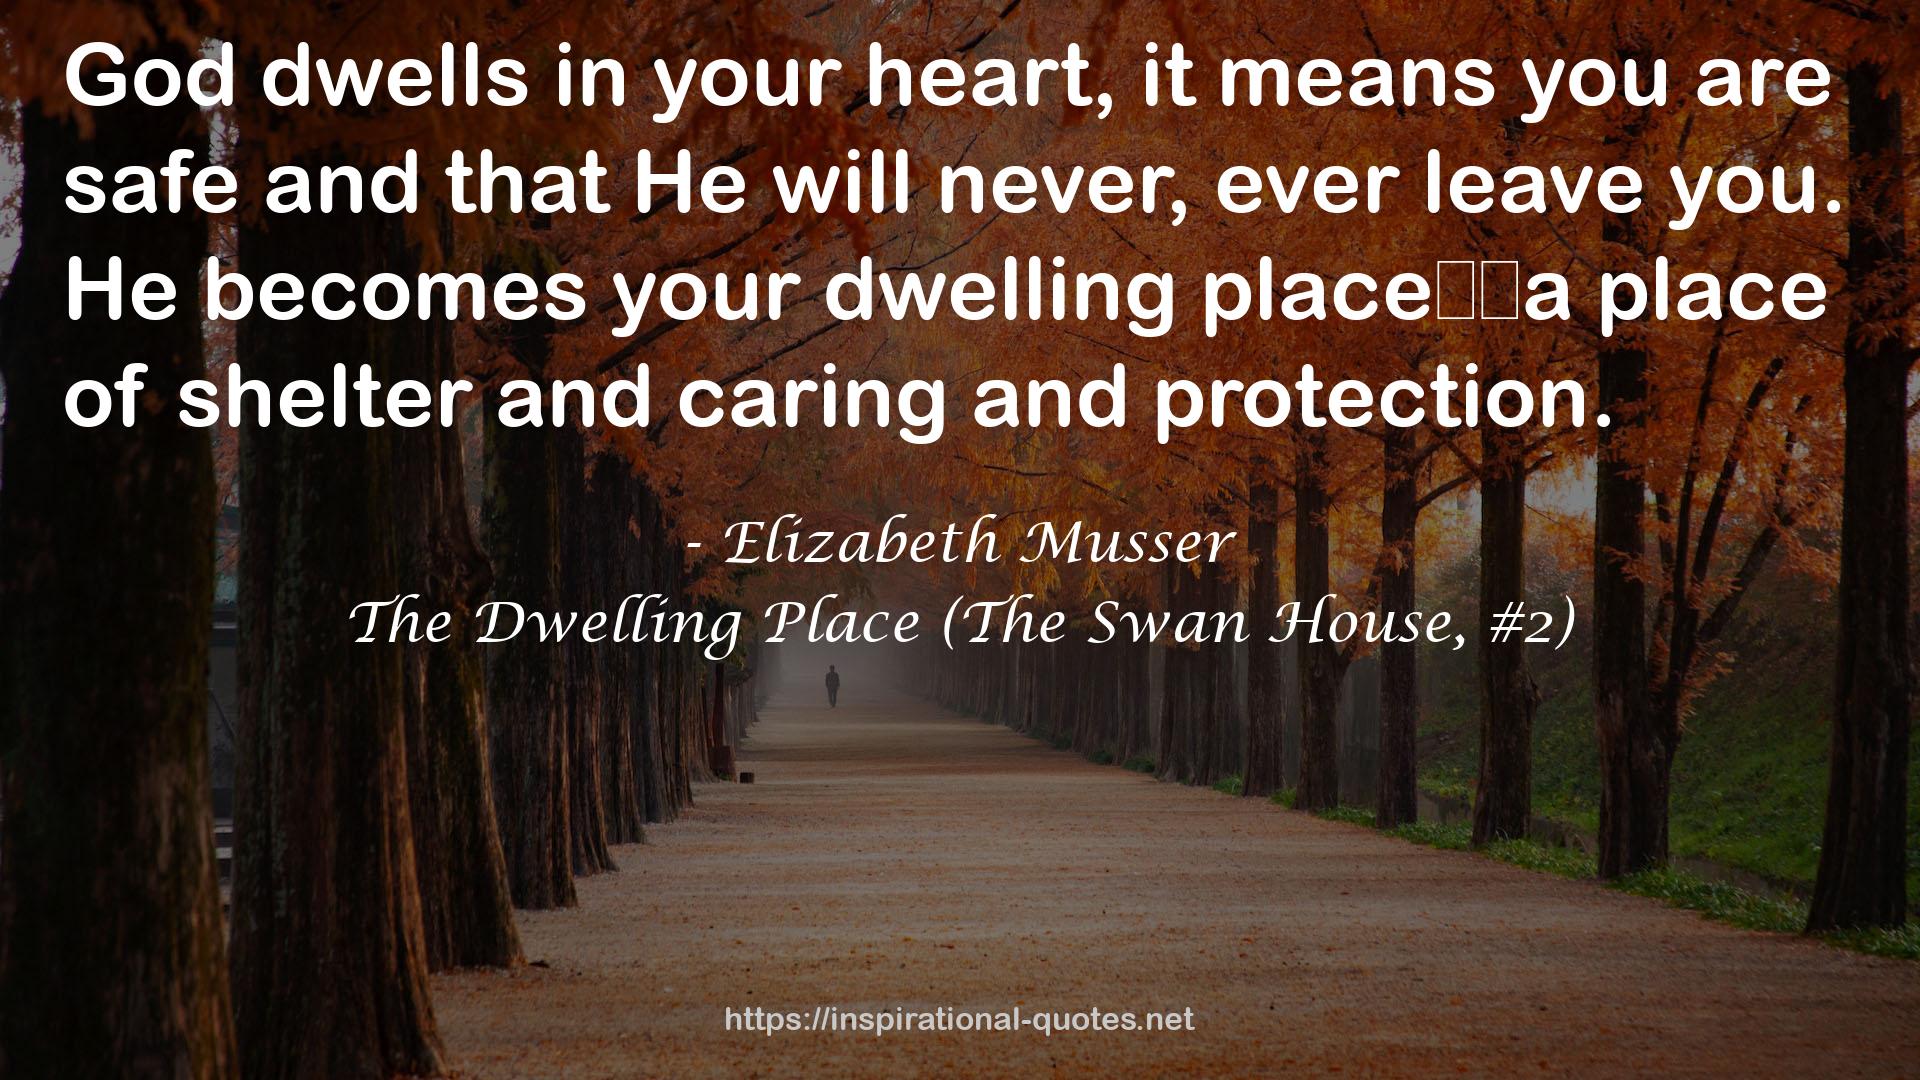 The Dwelling Place (The Swan House, #2) QUOTES